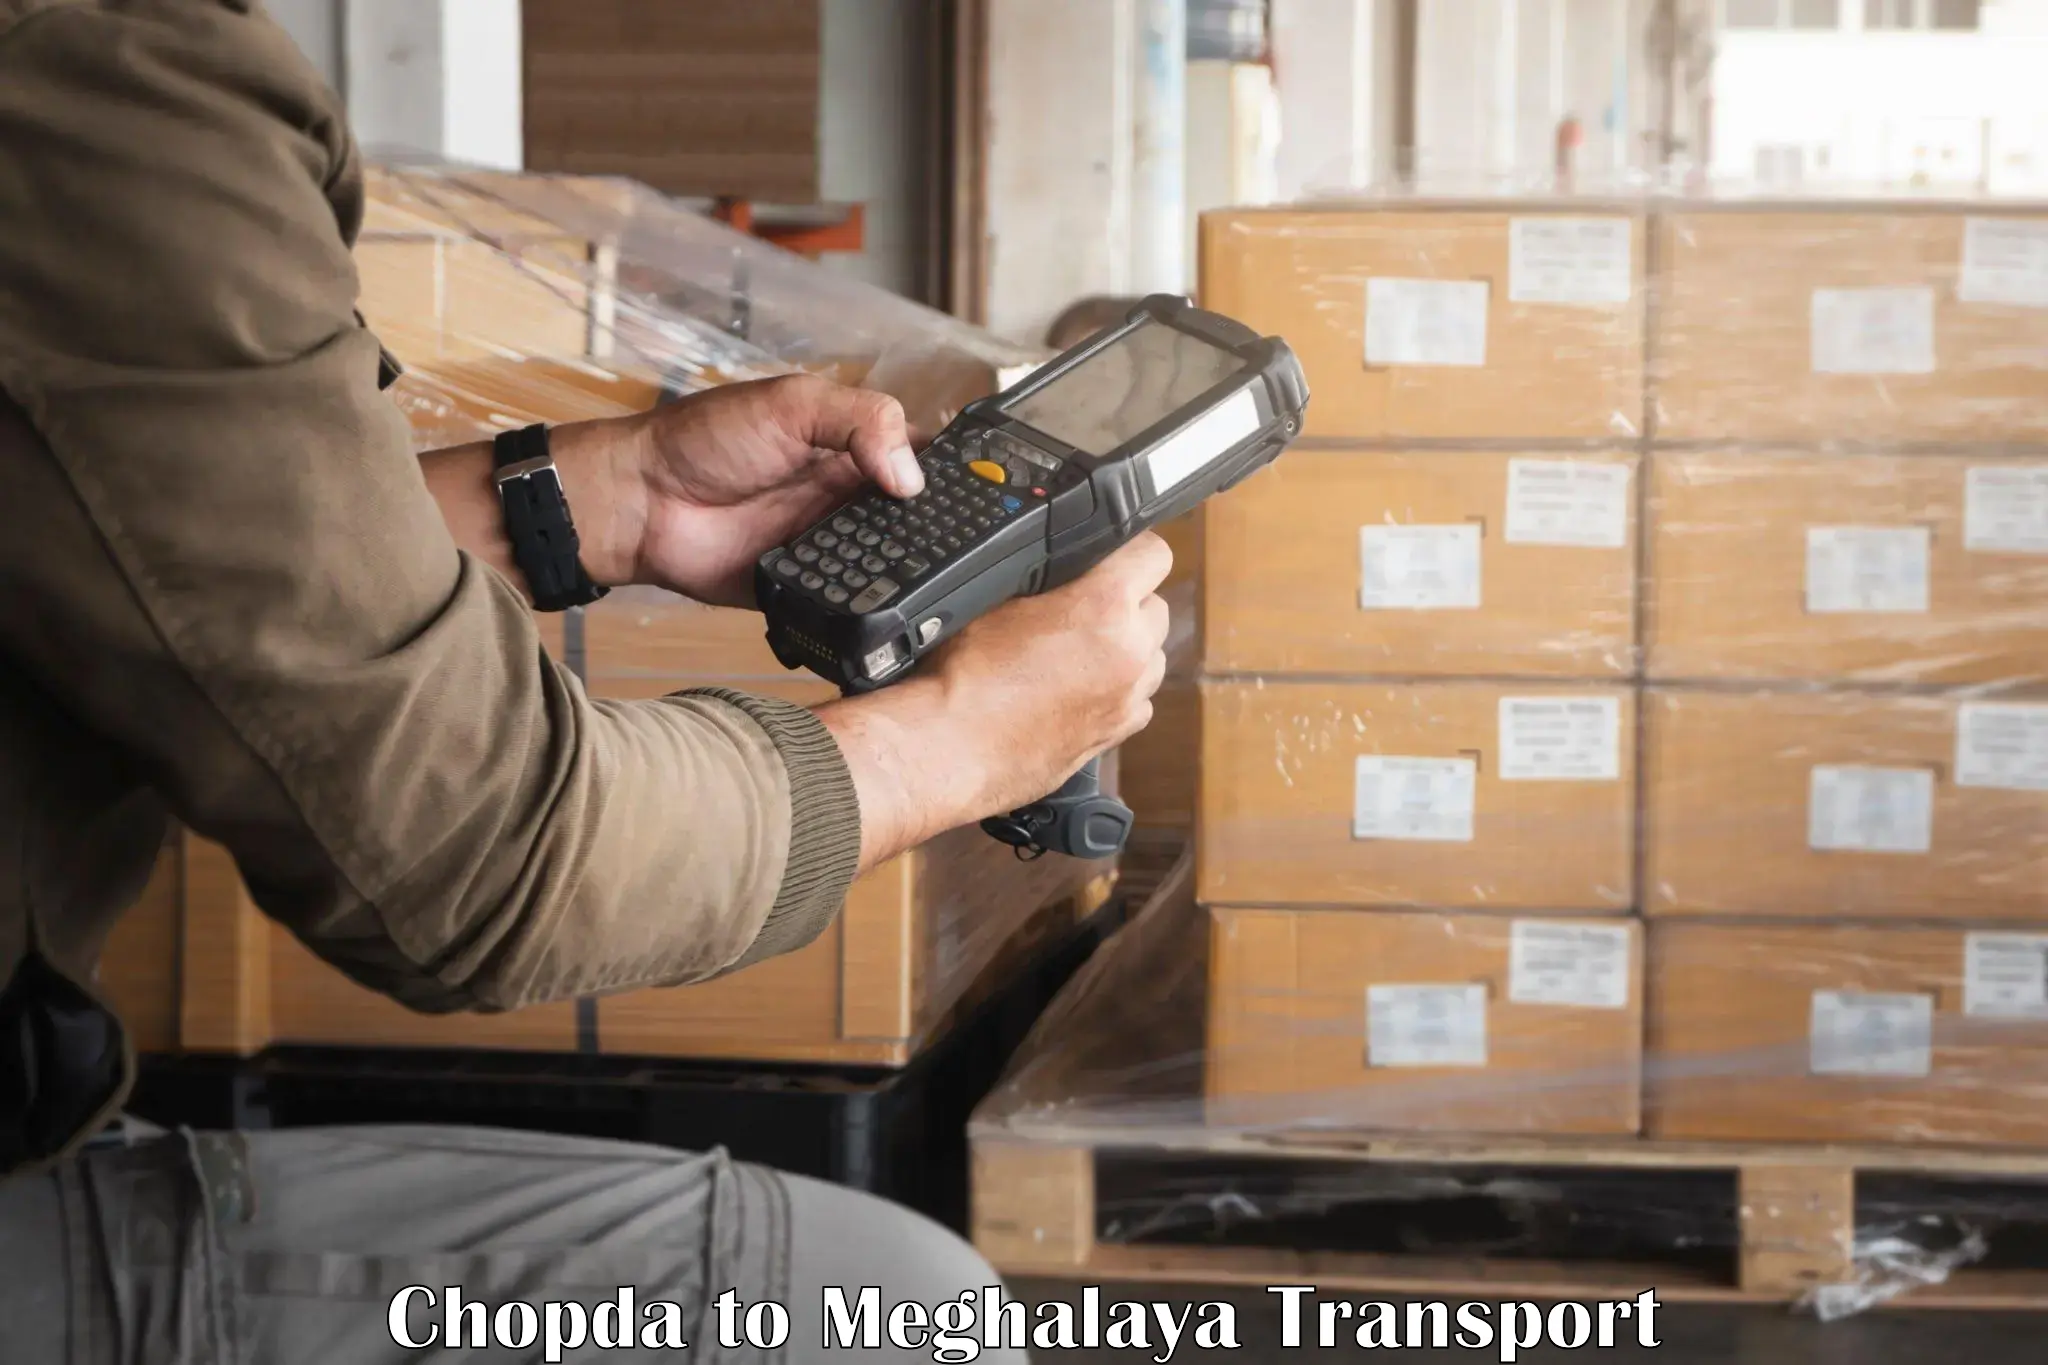 Truck transport companies in India Chopda to Marshillong